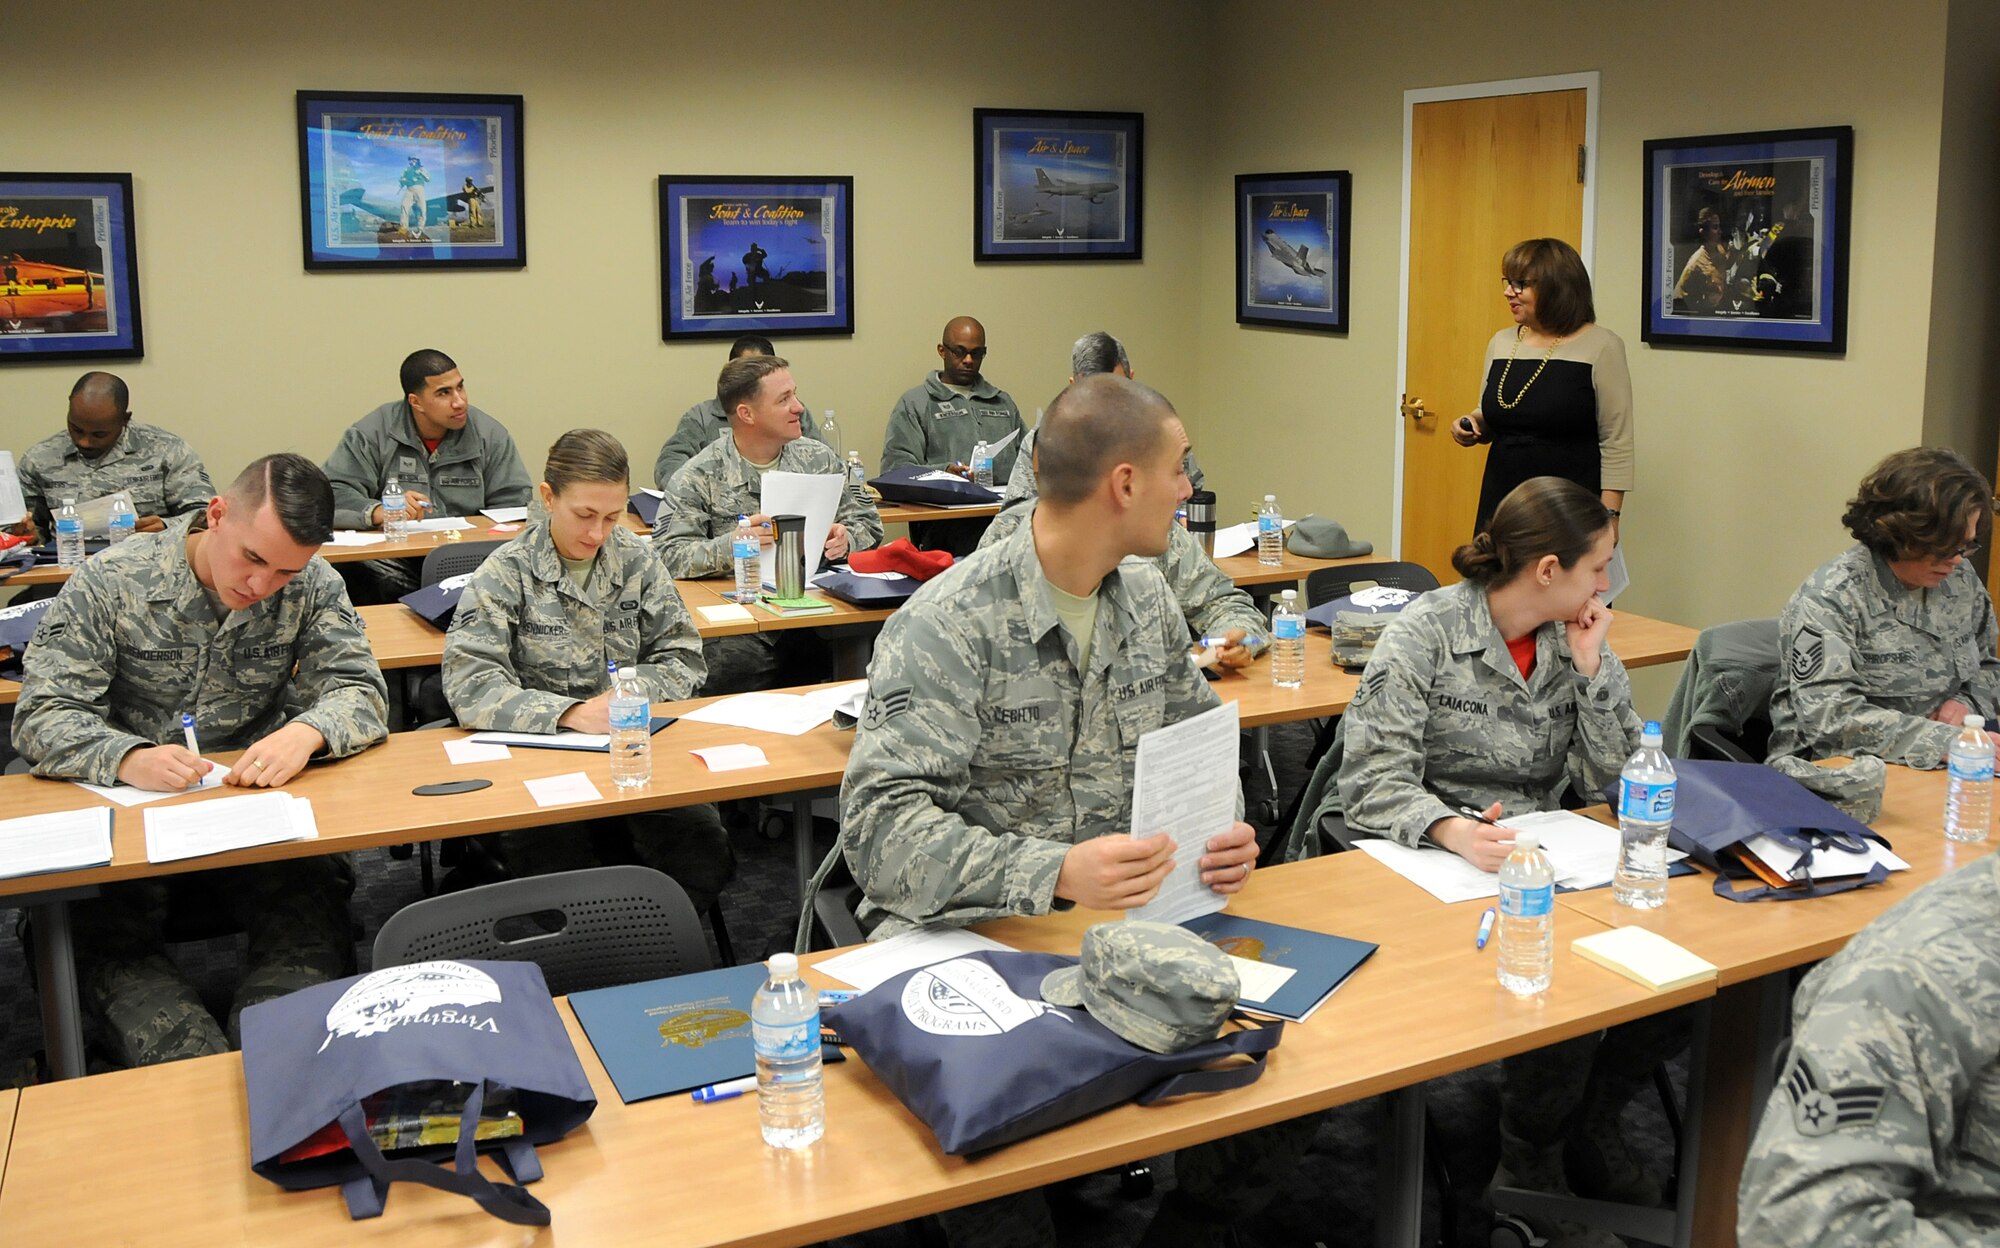 Ms. Angeli Wade, 192nd Fighter Wing Airman and Family Readiness Programs Manager, provides pre-separation counseling to Air National Guard members and Air Force Reservists considering separation or retirement from the military, Jan. 10, 2015 at Langley Air Force Base, Hampton Va.